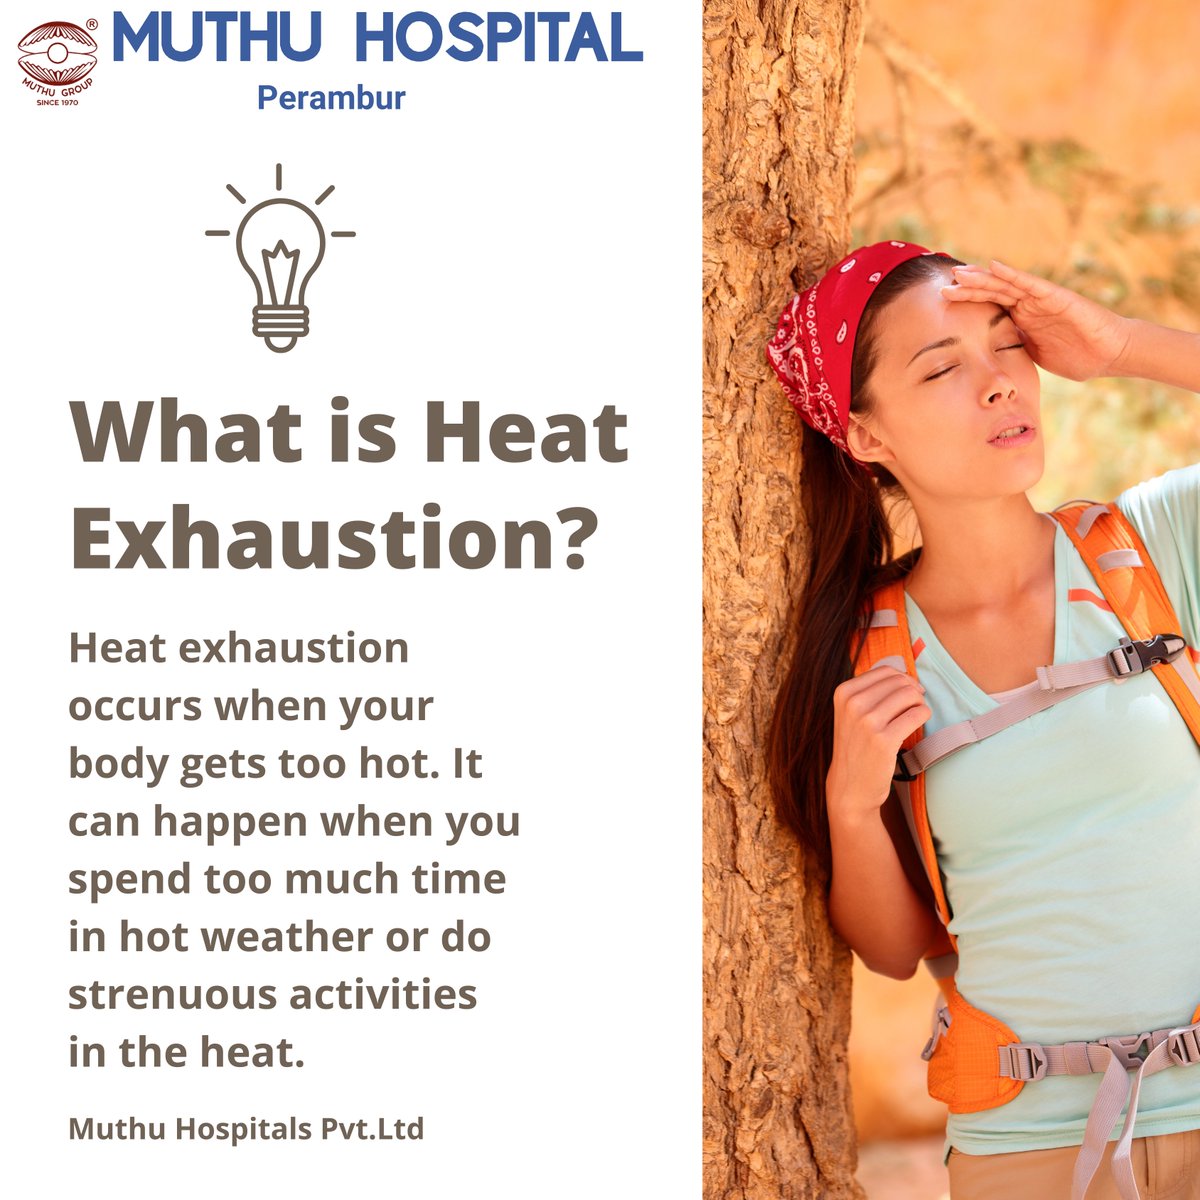 Discover the signs of heat exhaustion & protect yourself this summer! Learn from Muthu Hospital Perambur about this serious heat-related condition. Stay safe in the sun! #HeatExhaustion #SummerSafety #HealthTips @muthuhospital_ #MuthuHospitalPerambur